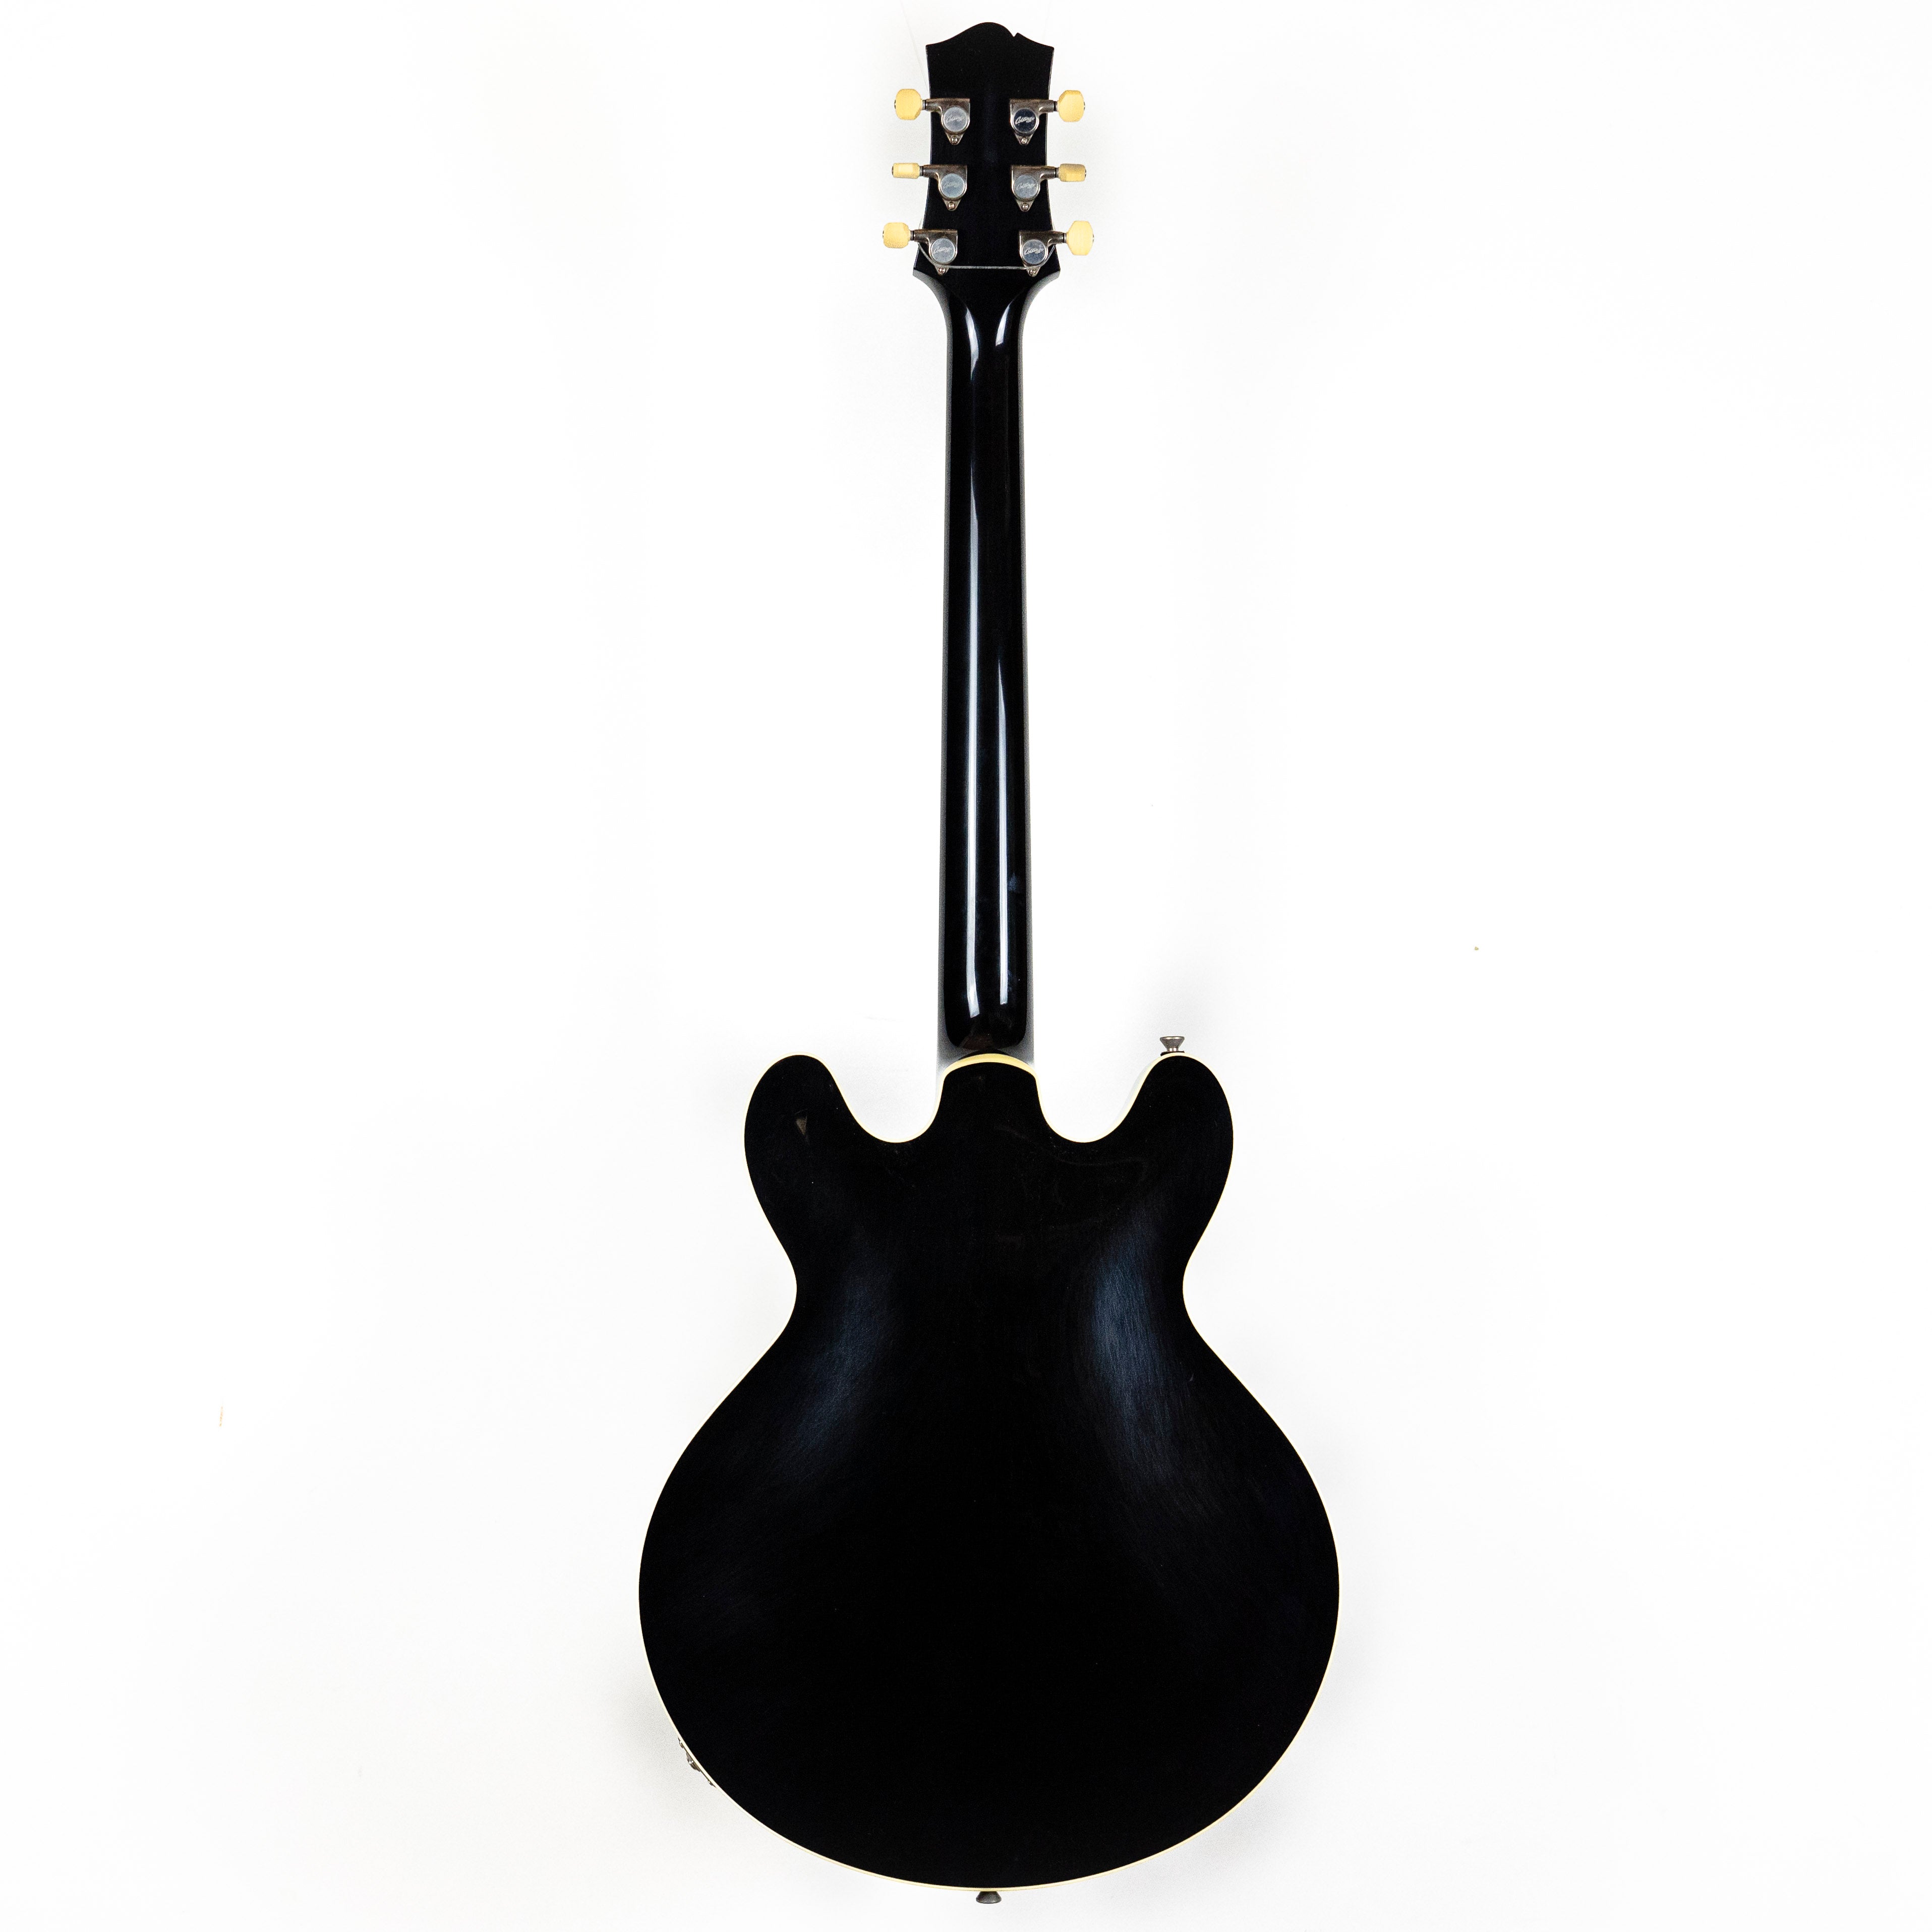 Collings I-35 LC Jet Black Aged Top Only, Lollar Pickups